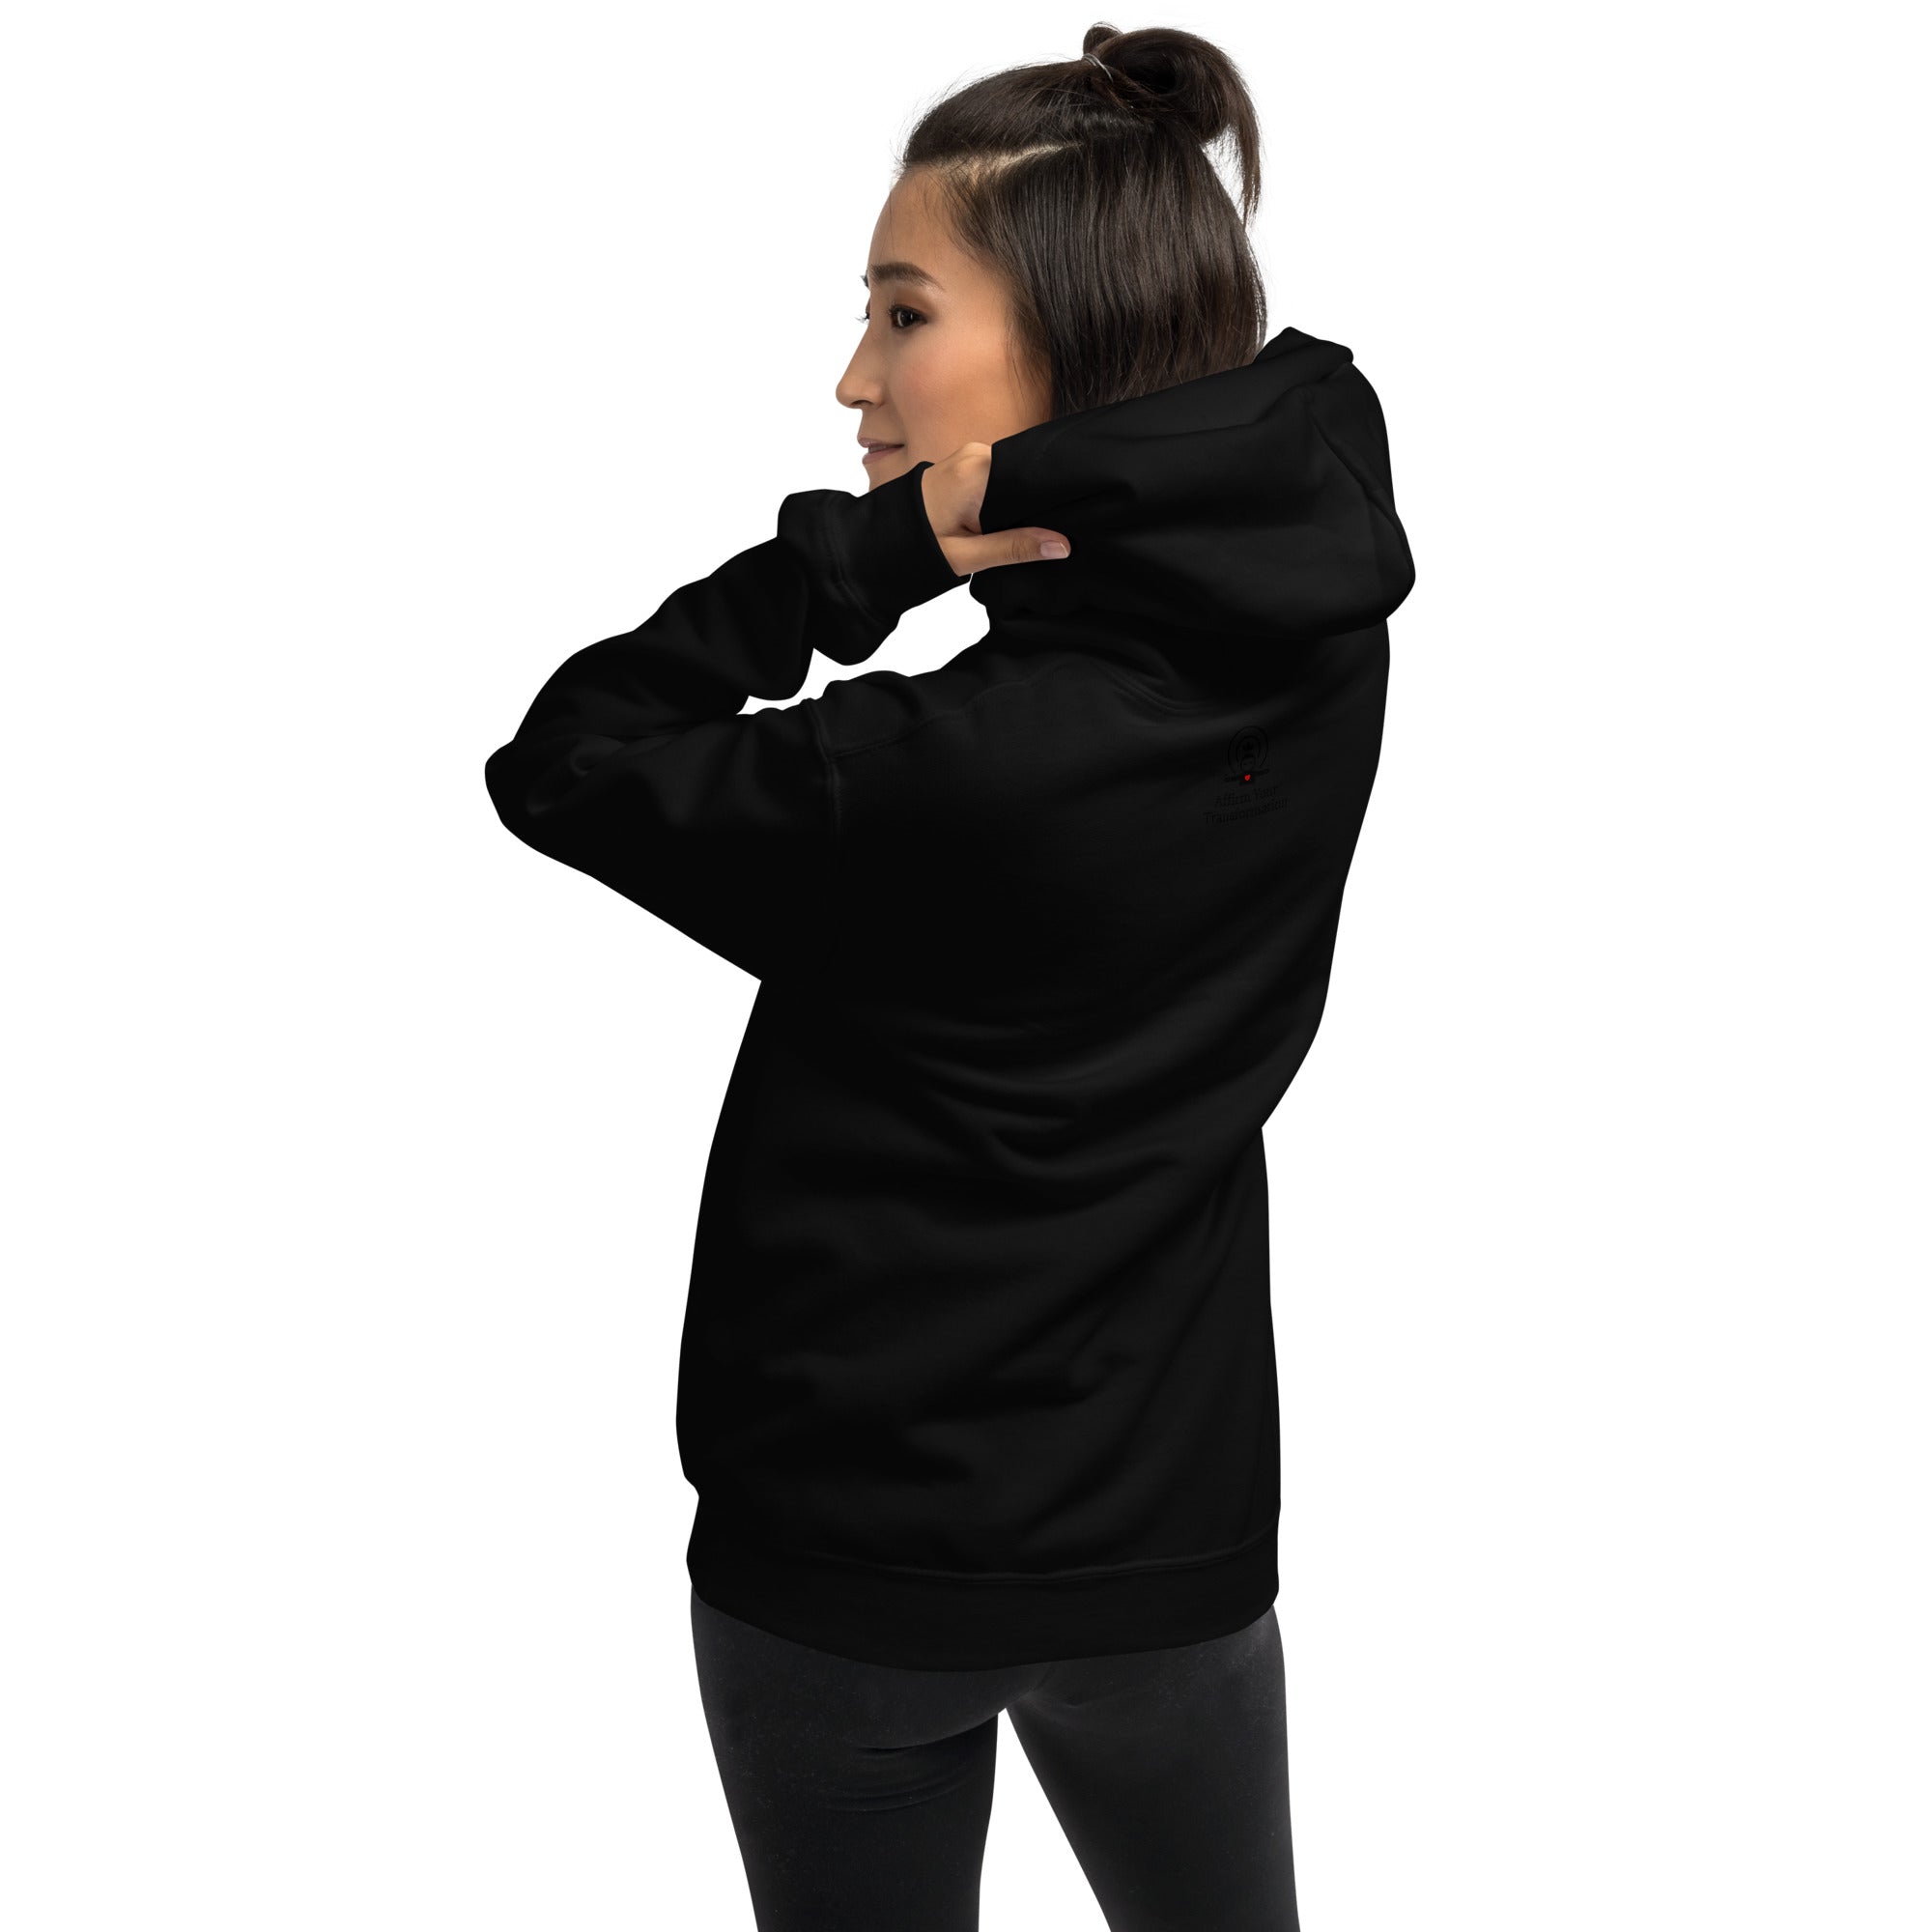 I AM WORTHY Mirror Affirmation Hoodie (Black Text) - 10 COLORS!